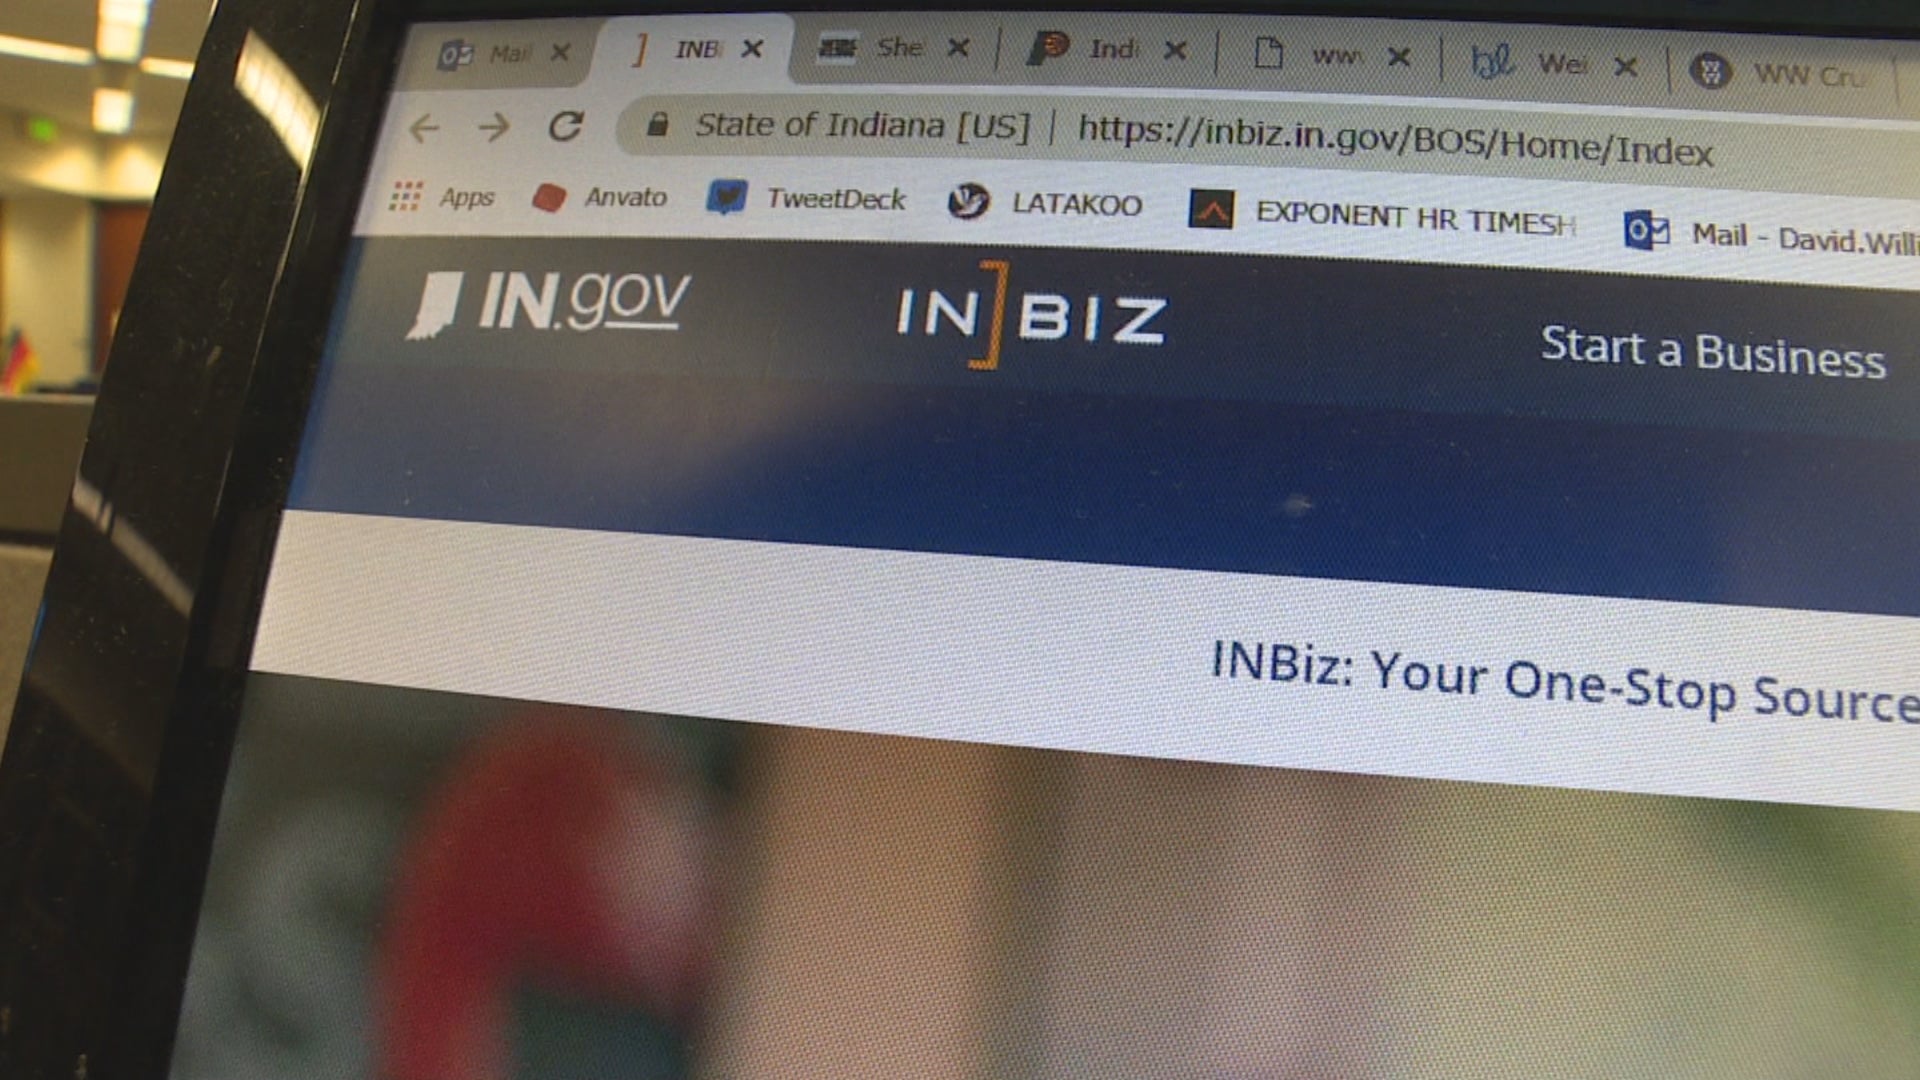 Indiana business website helps find $40M in unclaimed property - WISH-TV | Indianapolis News ...